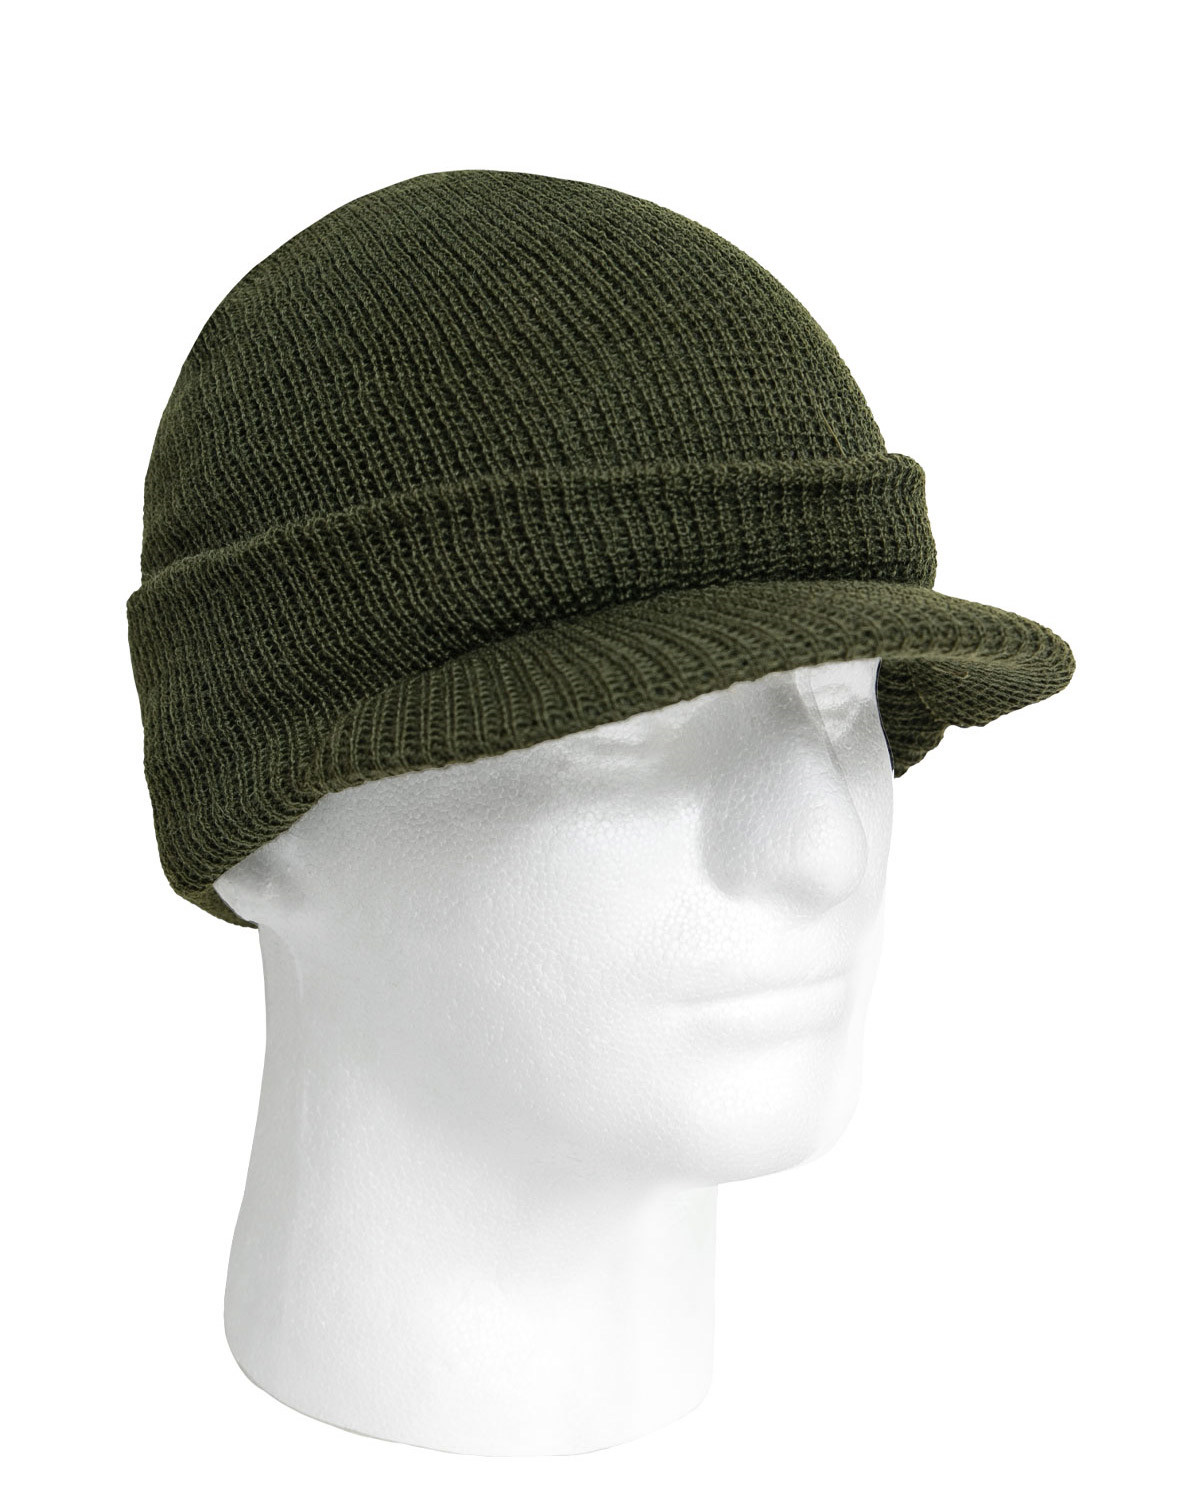 Rothco Varm Jeep Cap - 100% Uld (Oliven, One Size)